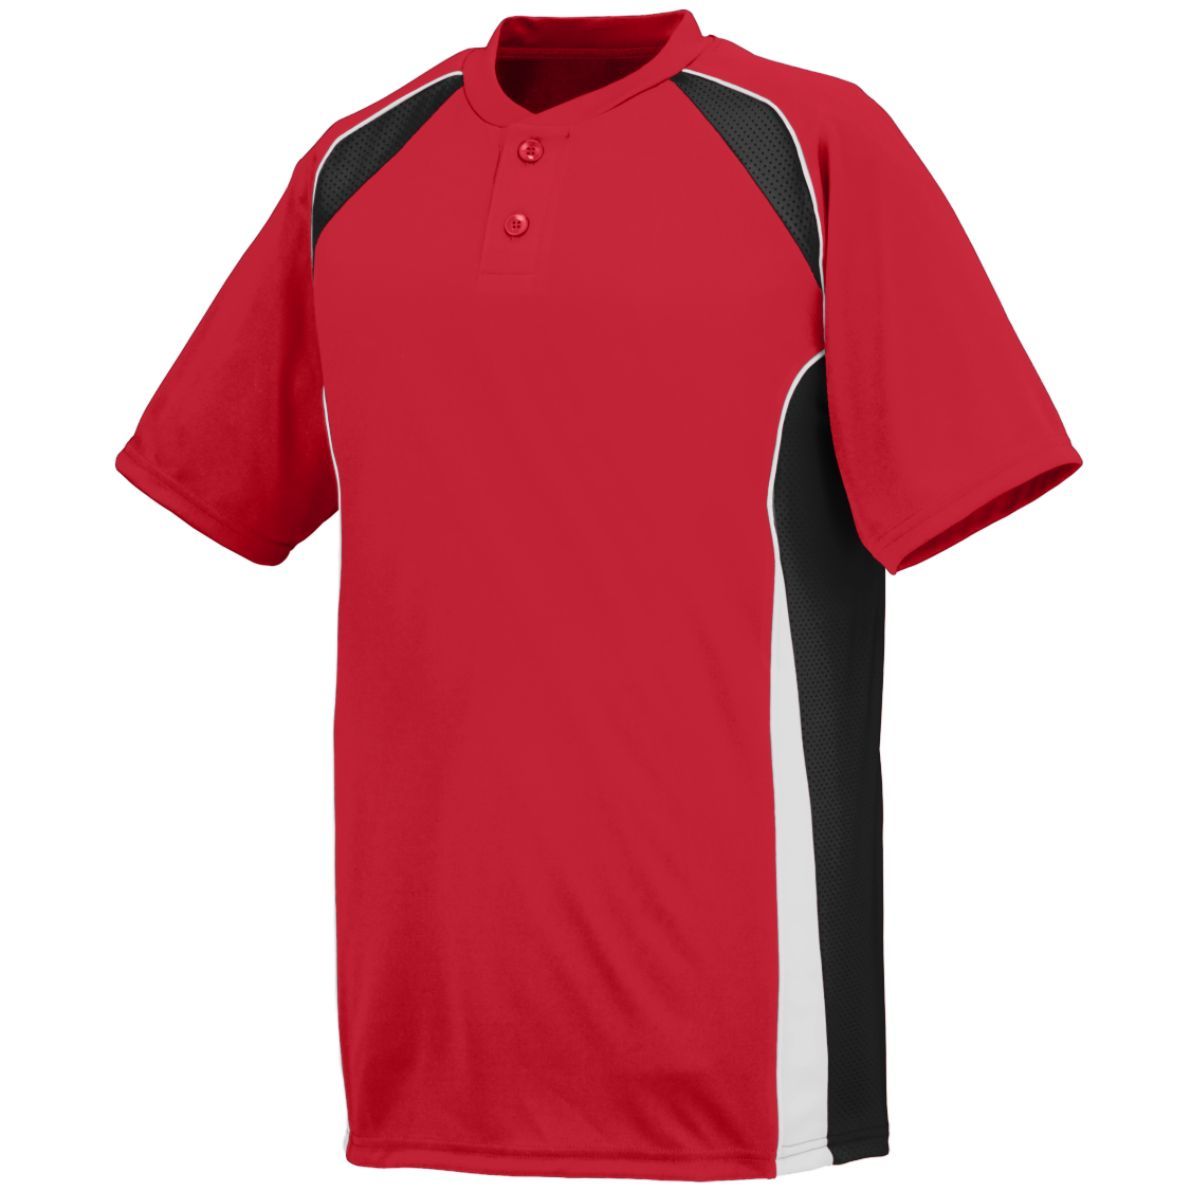 Augusta Sportswear Youth Base Hit Jersey in Red/Black/White  -Part of the Youth, Youth-Jersey, Augusta-Products, Baseball, Shirts, All-Sports, All-Sports-1 product lines at KanaleyCreations.com